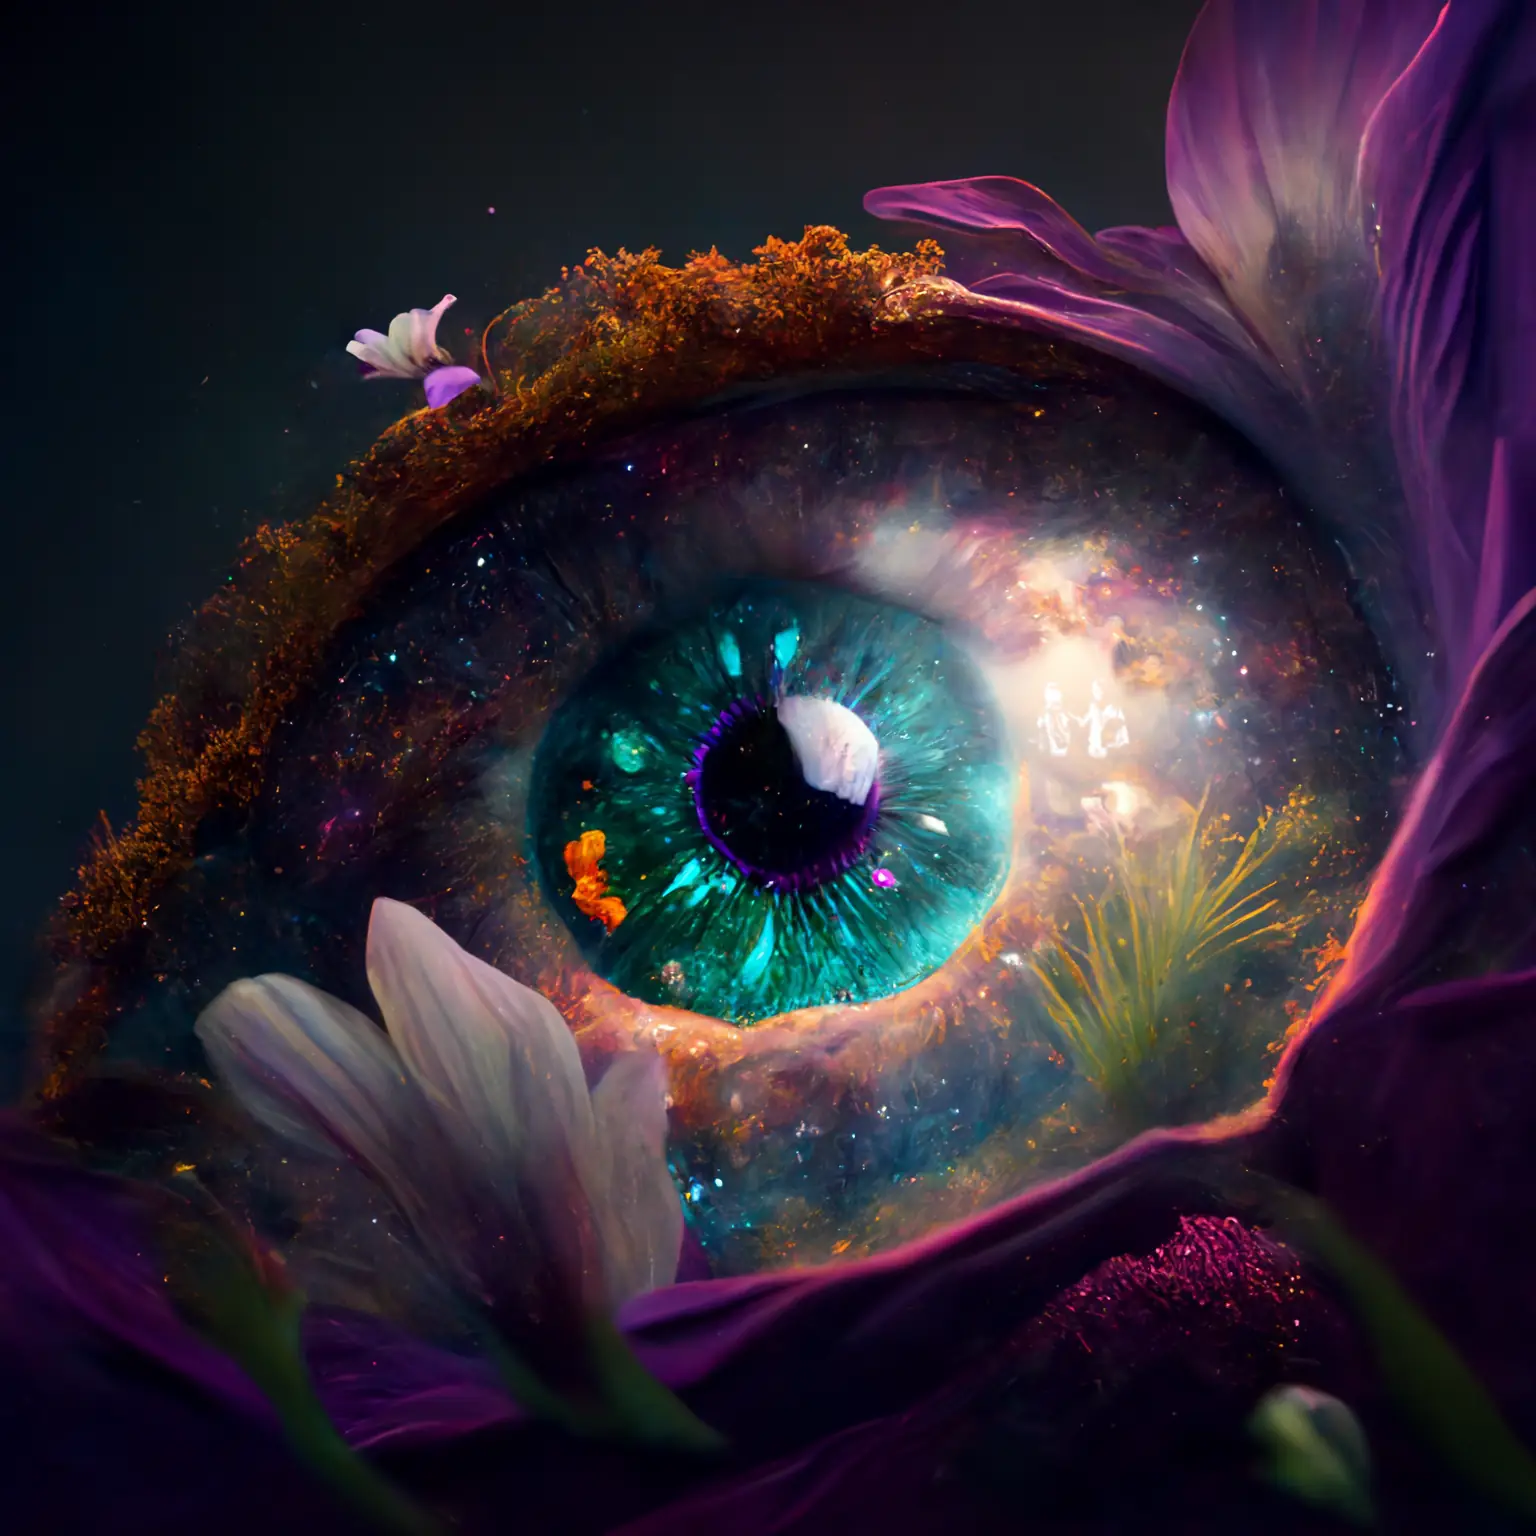 A colourful artistic rendering of galaxies surrounding an eye that is underwater.